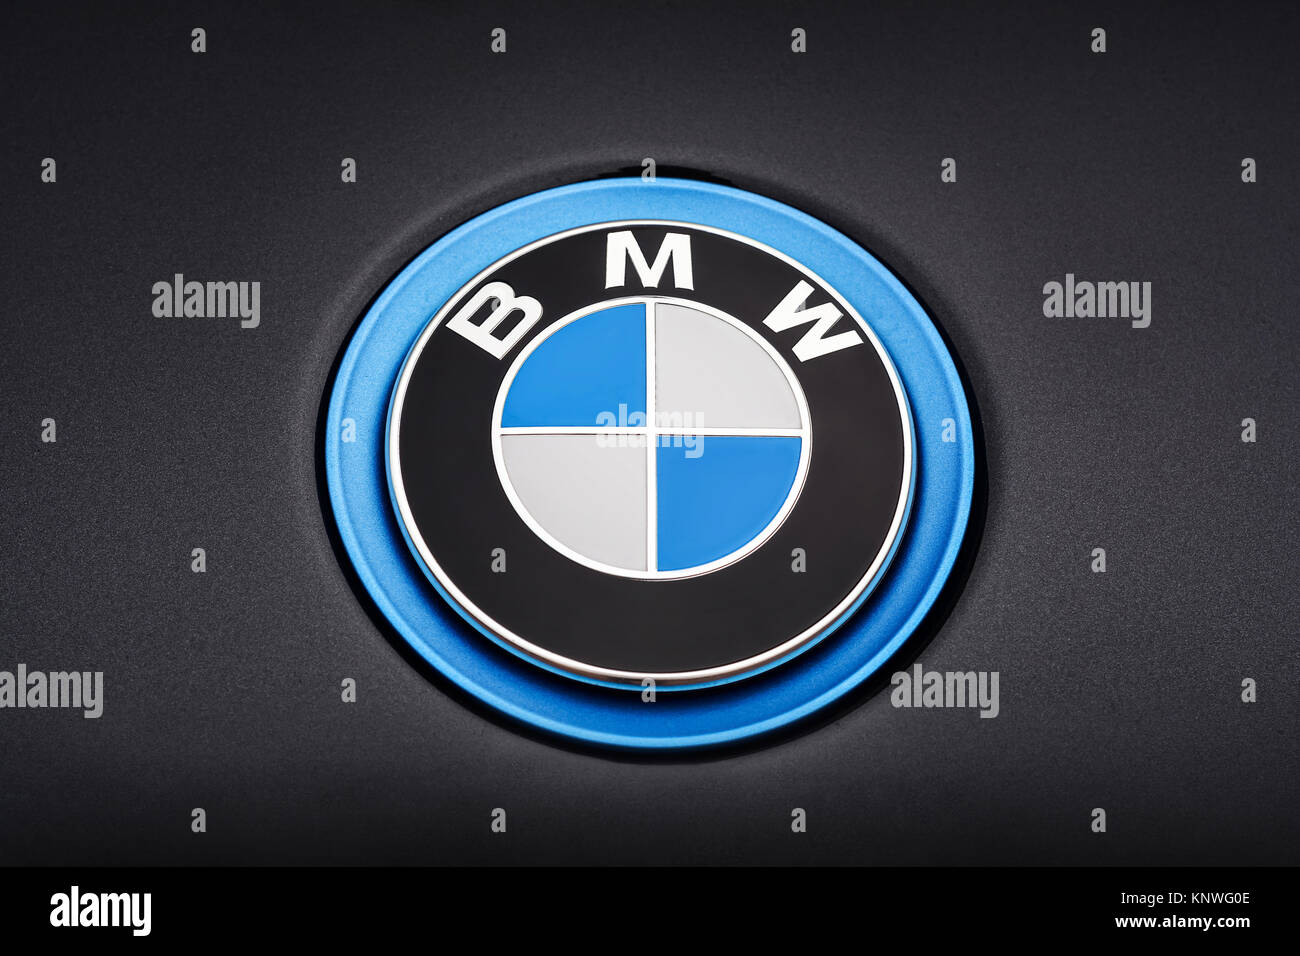 Baden-Baden, Germany - March 27, 2015: Detail of the a BMW logo on a car. Bavarian Motor Works is a German luxury vehicle, motorcycle, and engine manu Stock Photo